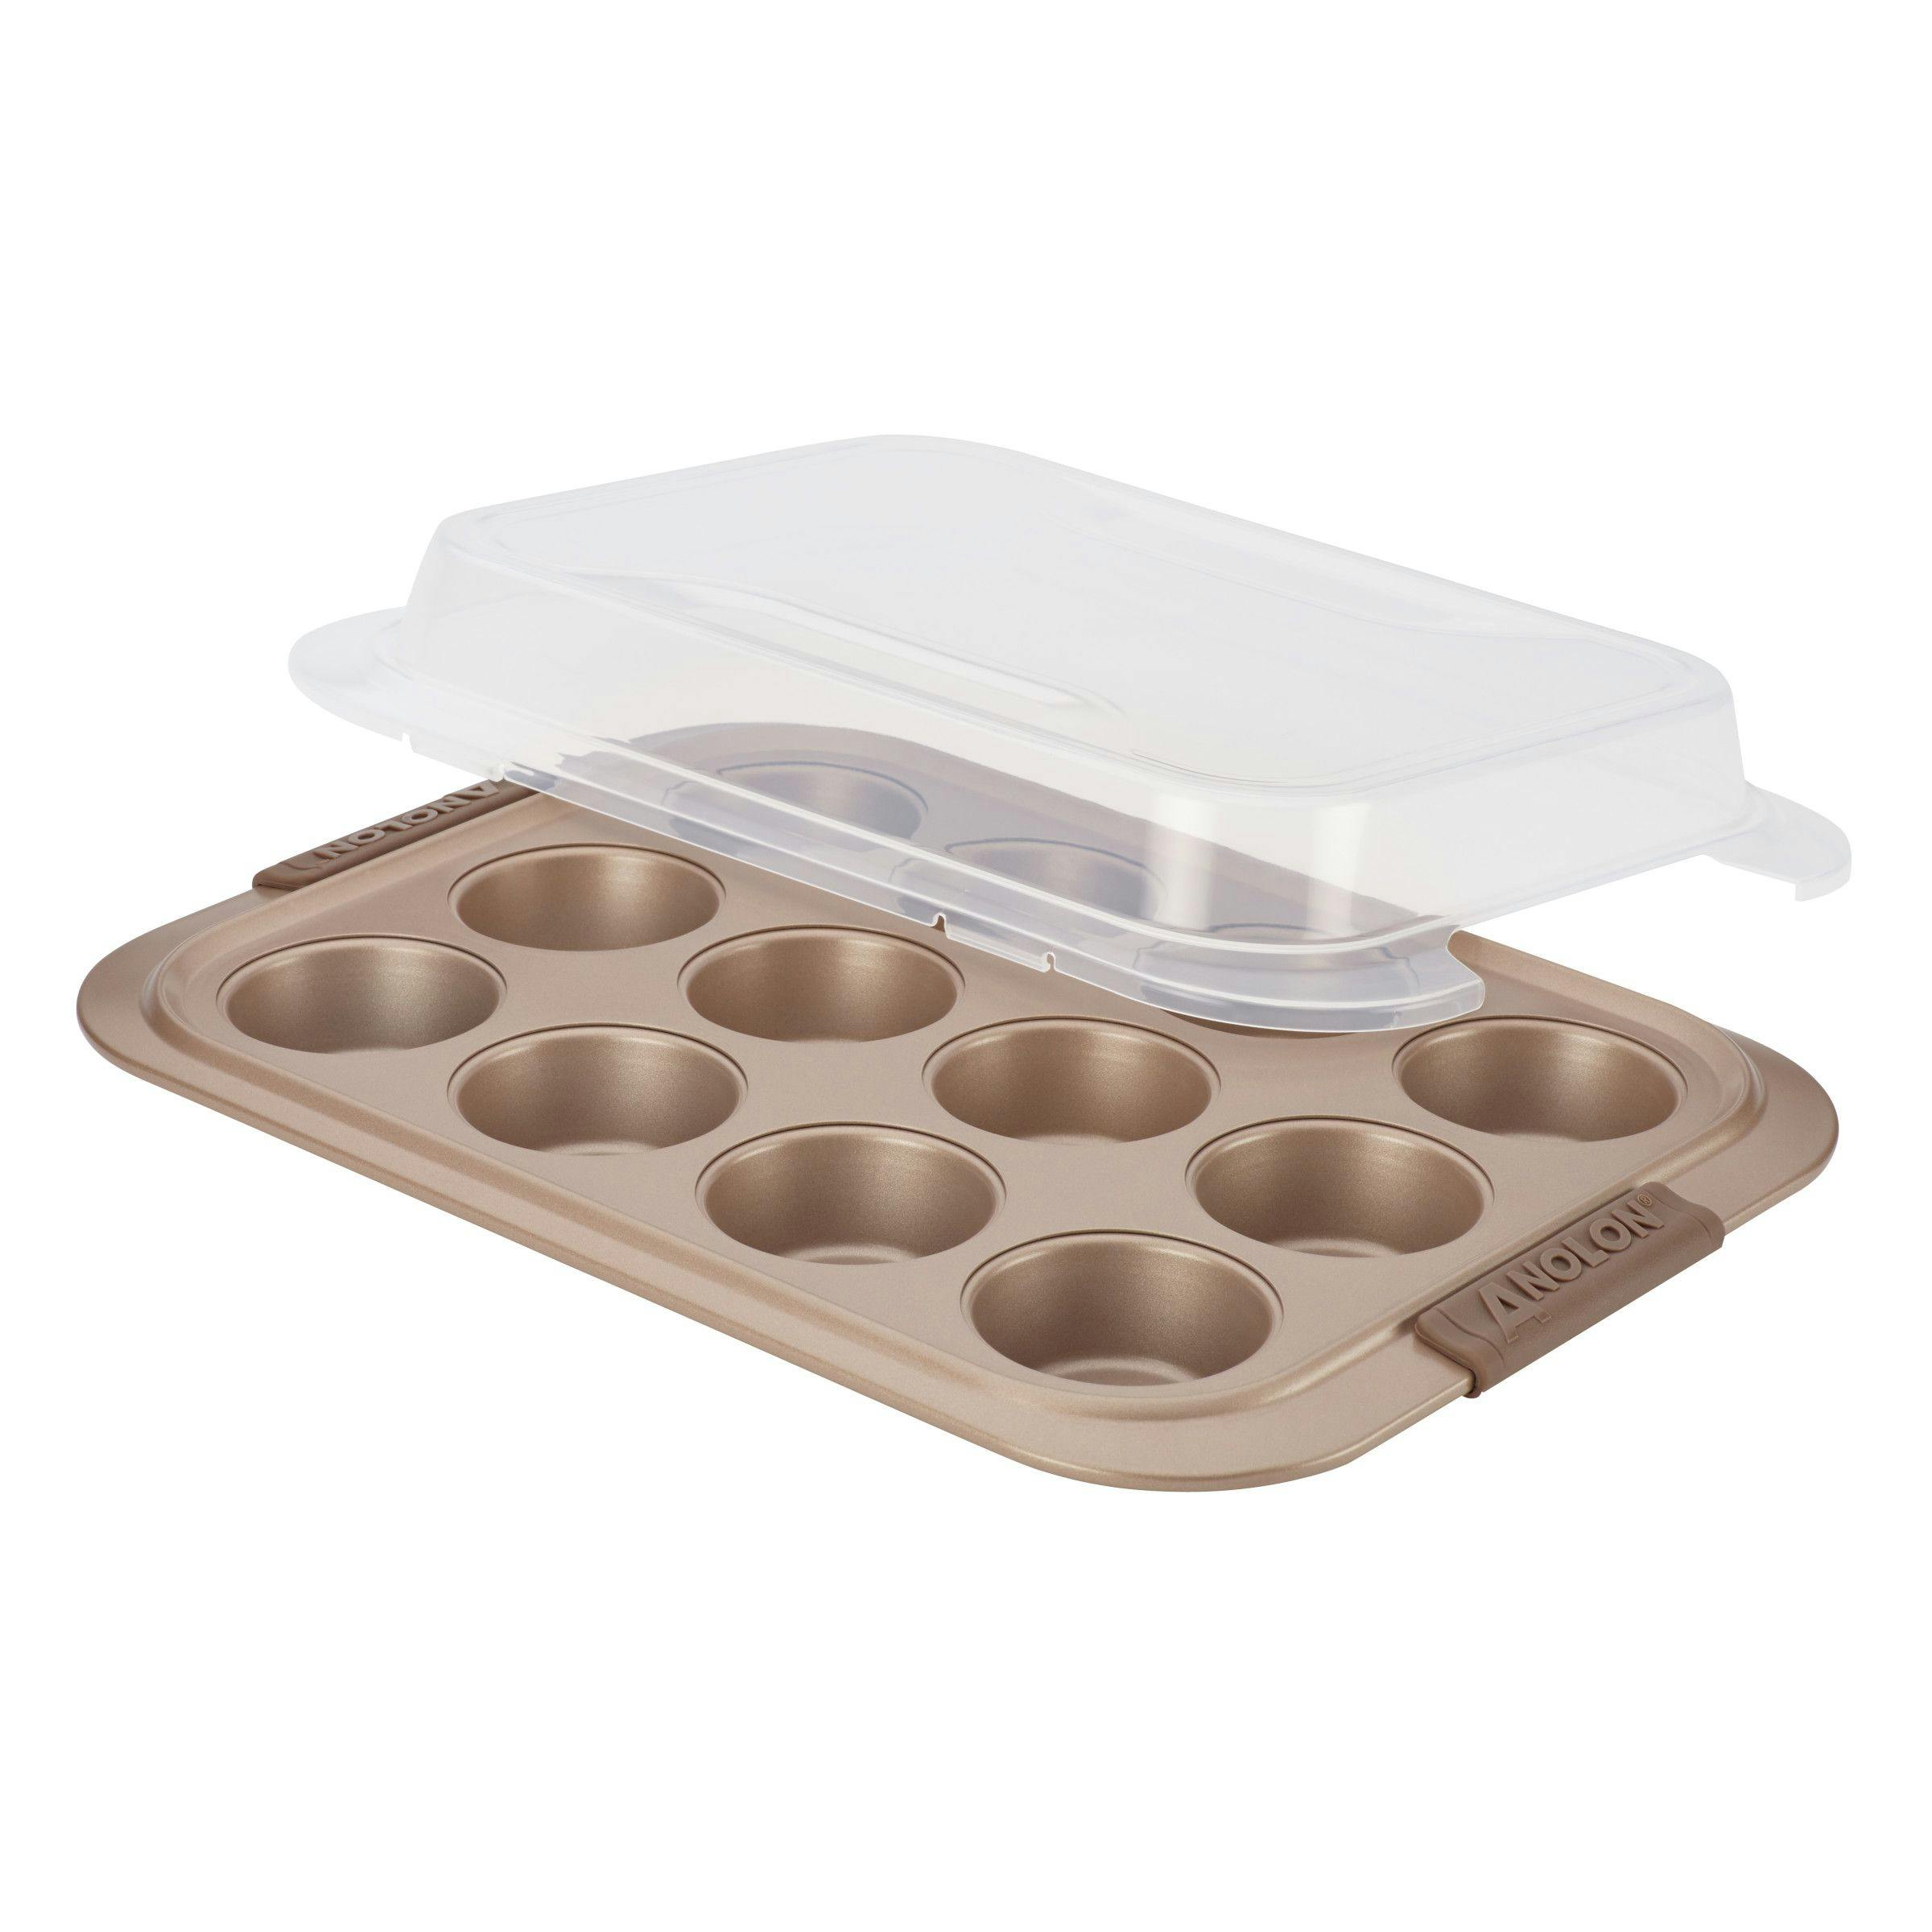 Anolon Advanced 12-Cup Muffin Pan with Lid, Bronze